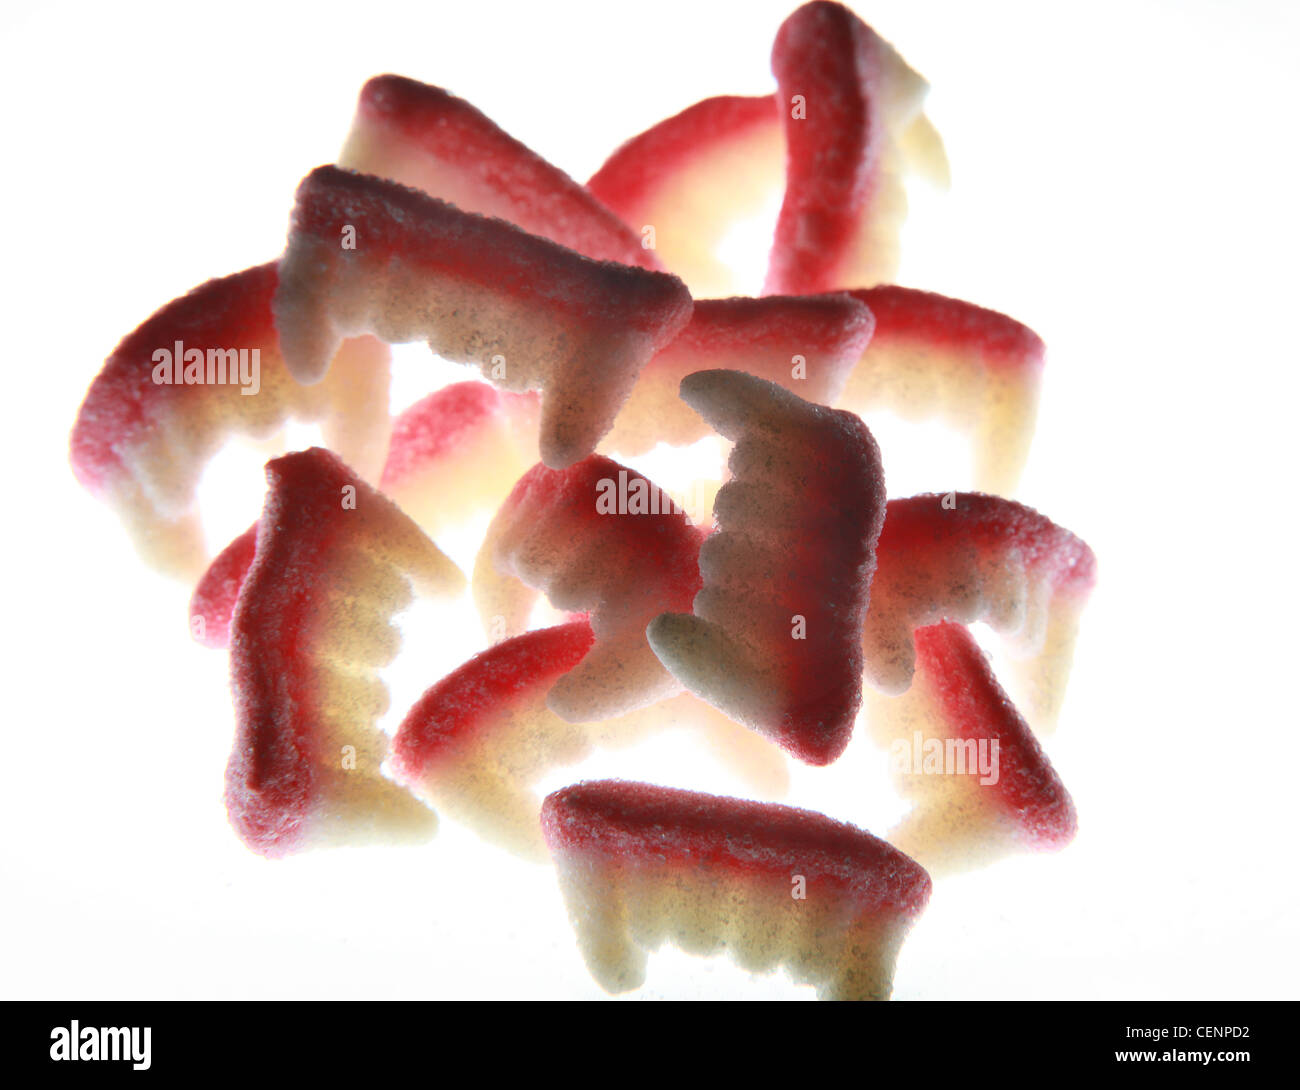 16 sets of candy, sweet, sugar vampire teeth in a pile. Stock Photo